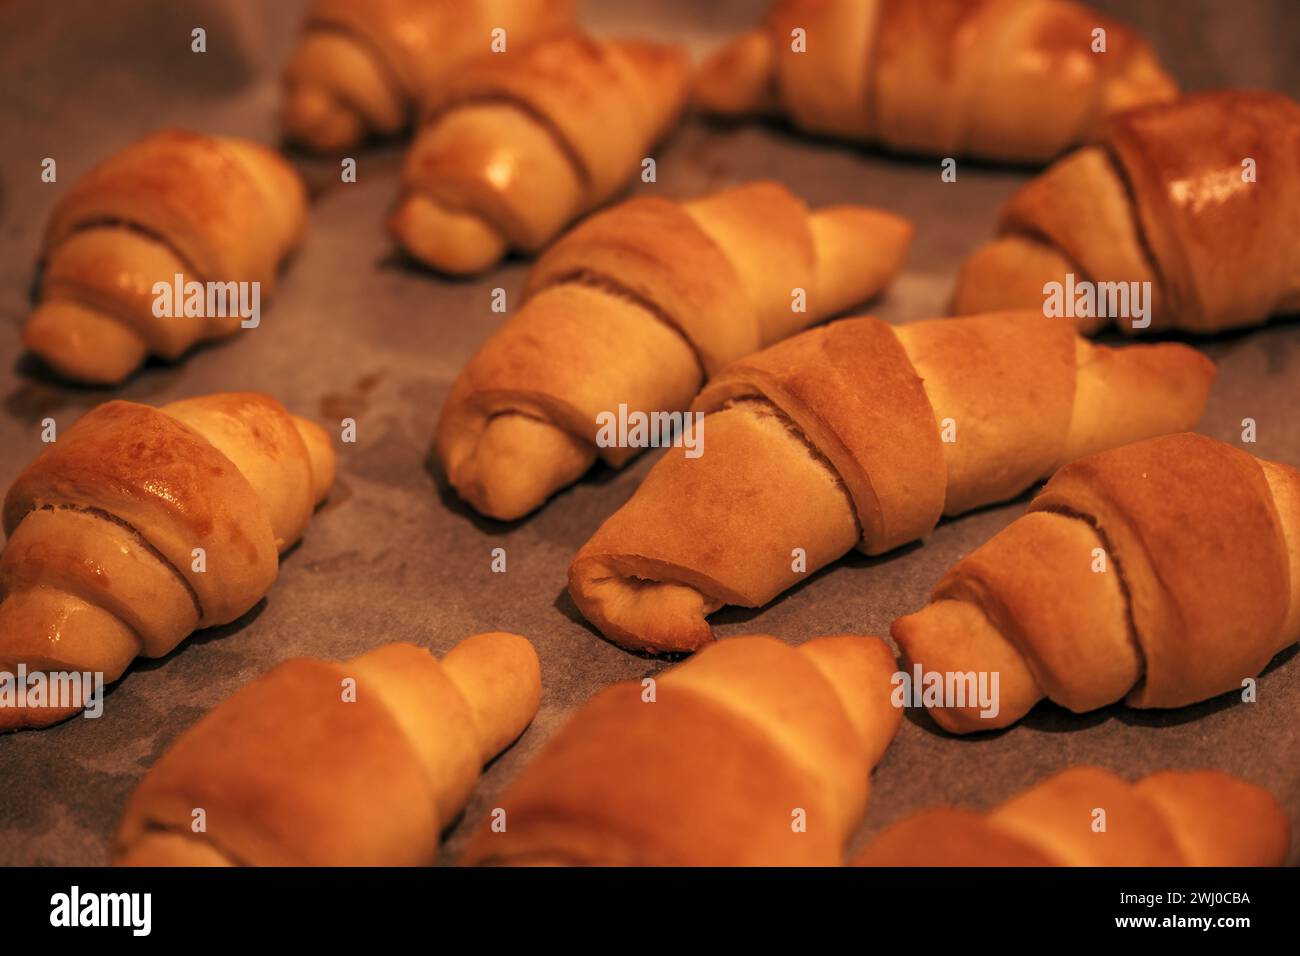 Homemade croissants on a plate after baking, selective focus Stock Photo